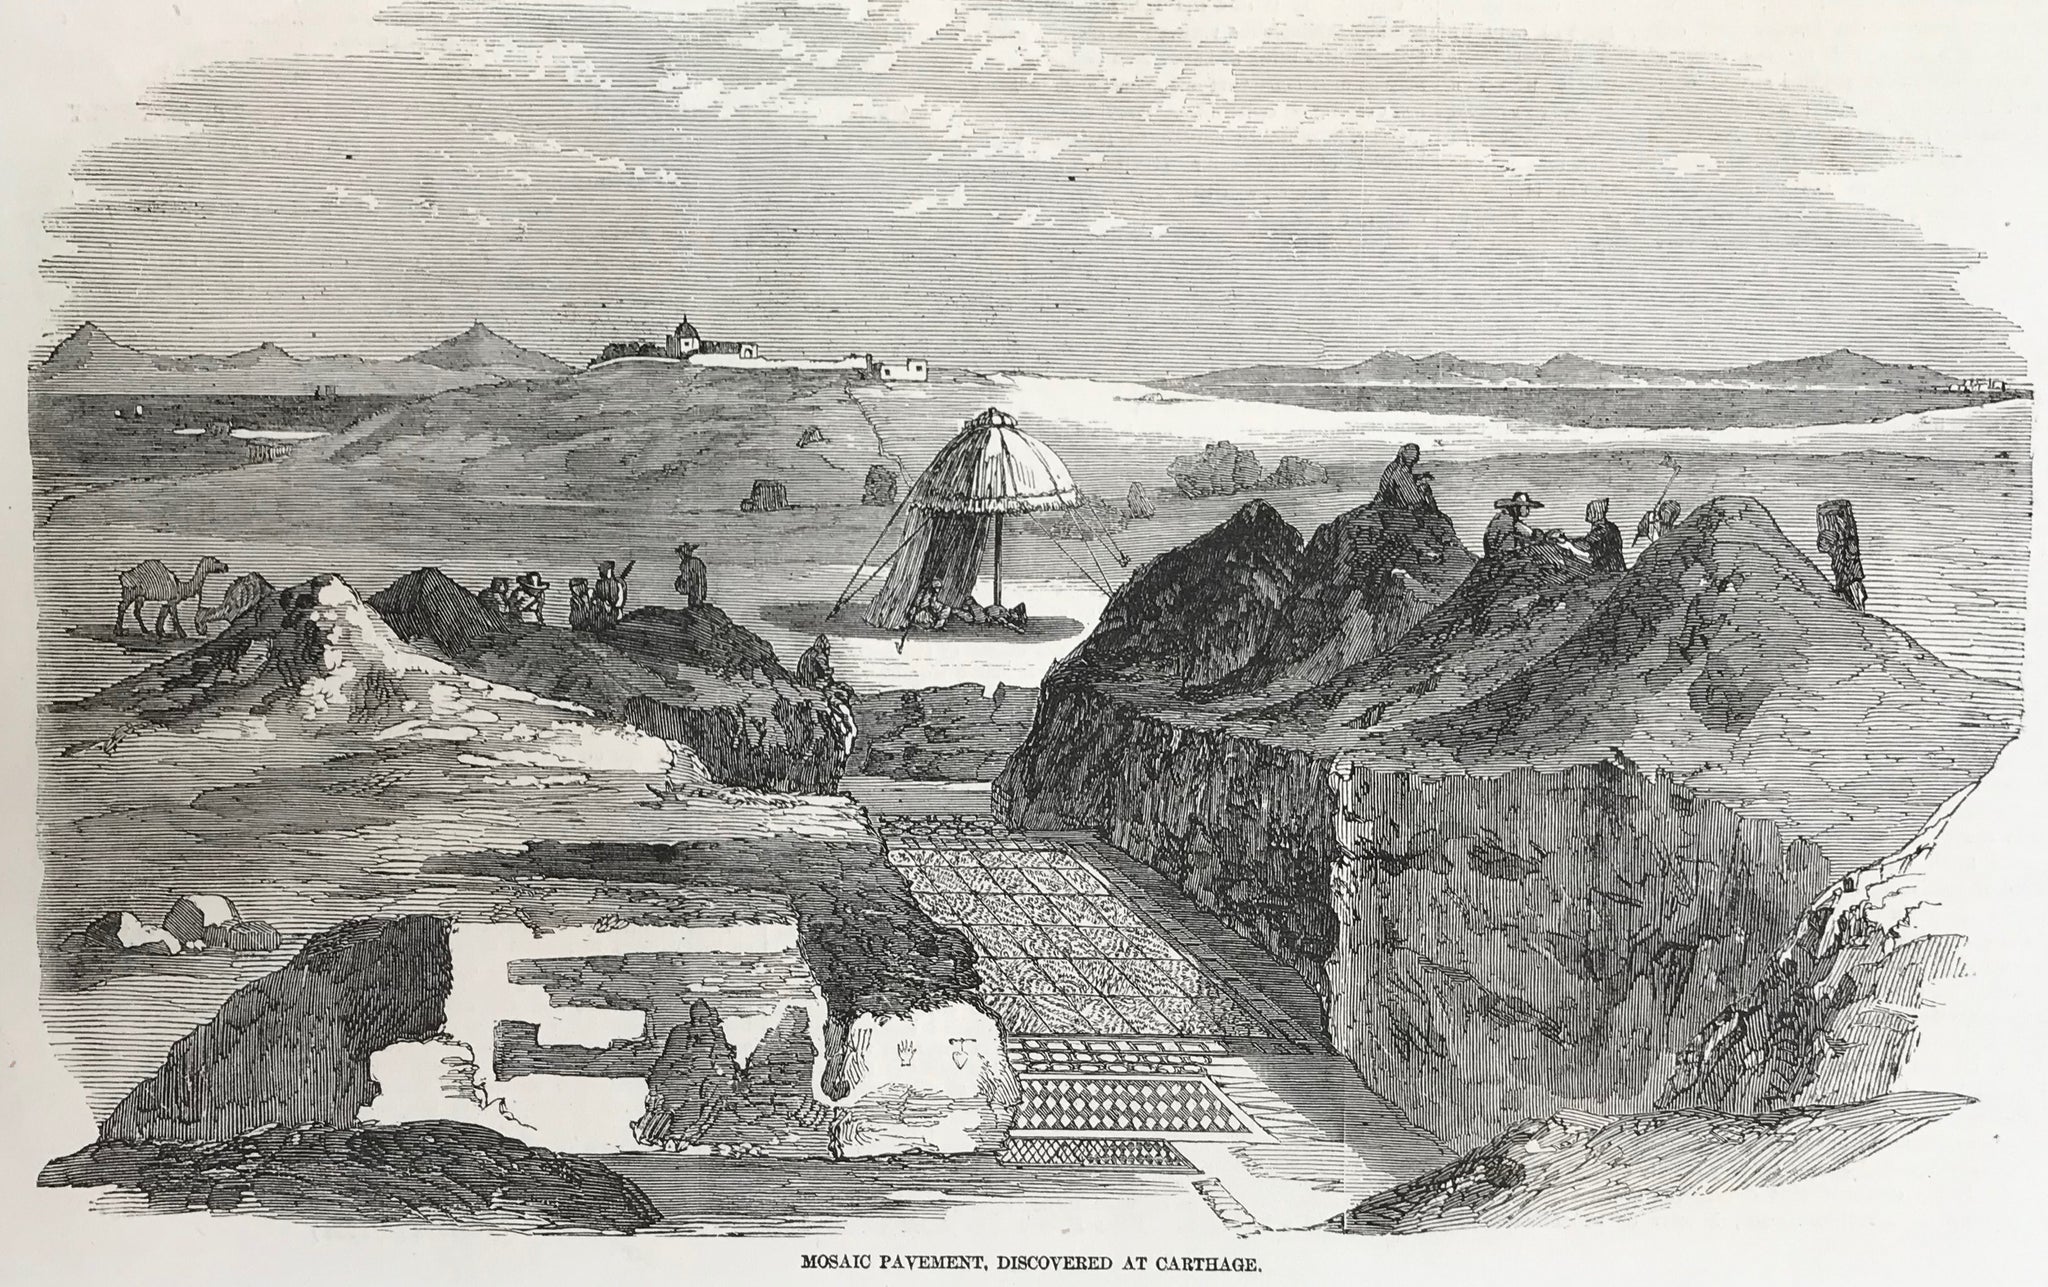 Archeology, "Mosaic Pavement, Discovered at Carthage."  Wood engraving, 1858. Reverse side is printed. Narrow upper margin.